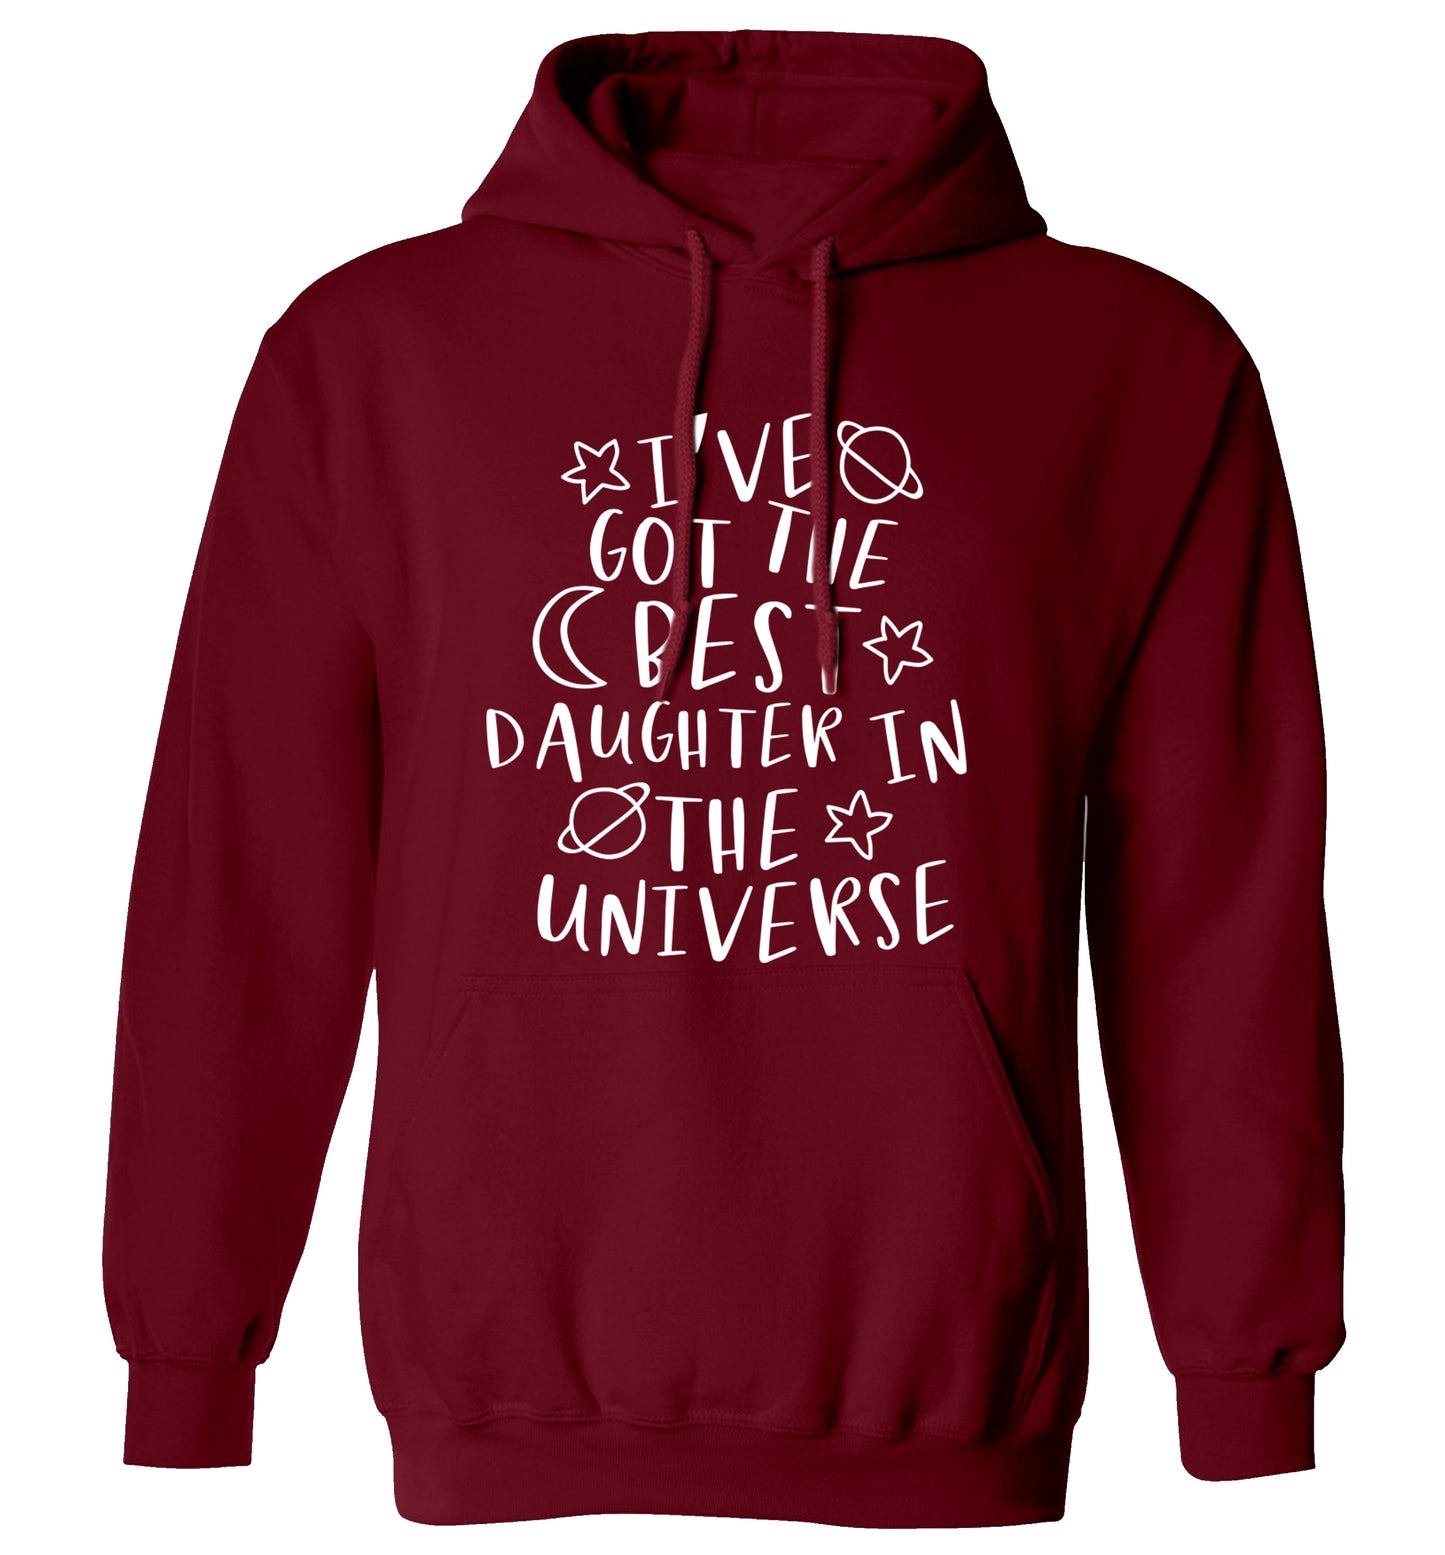 I've got the best daughter in the universe adults unisex maroon hoodie 2XL